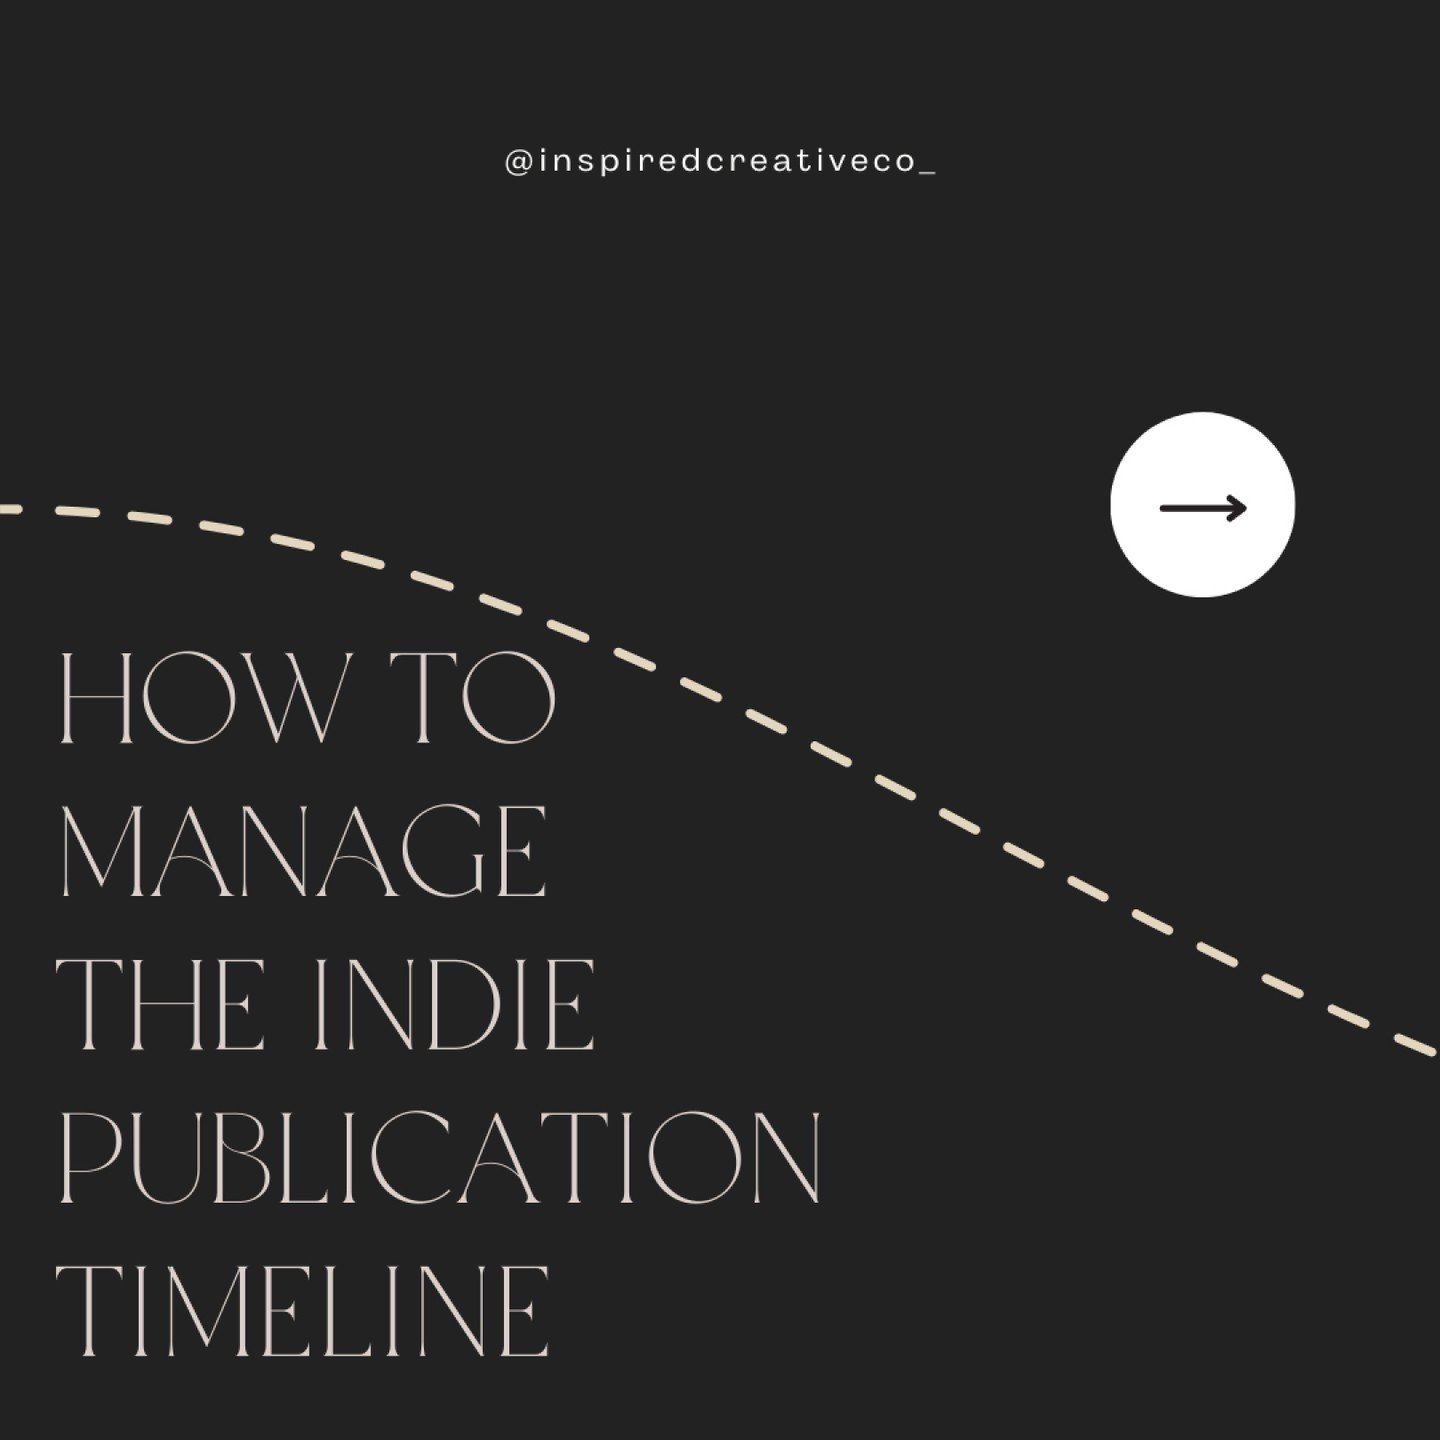 How to manage the indie publication timeline

If you're considering self-publishing then you'll know there is a lot of planning that goes into it.

You're responsible for prepping all your edits and designs.

While it's obviously super exciting, it c